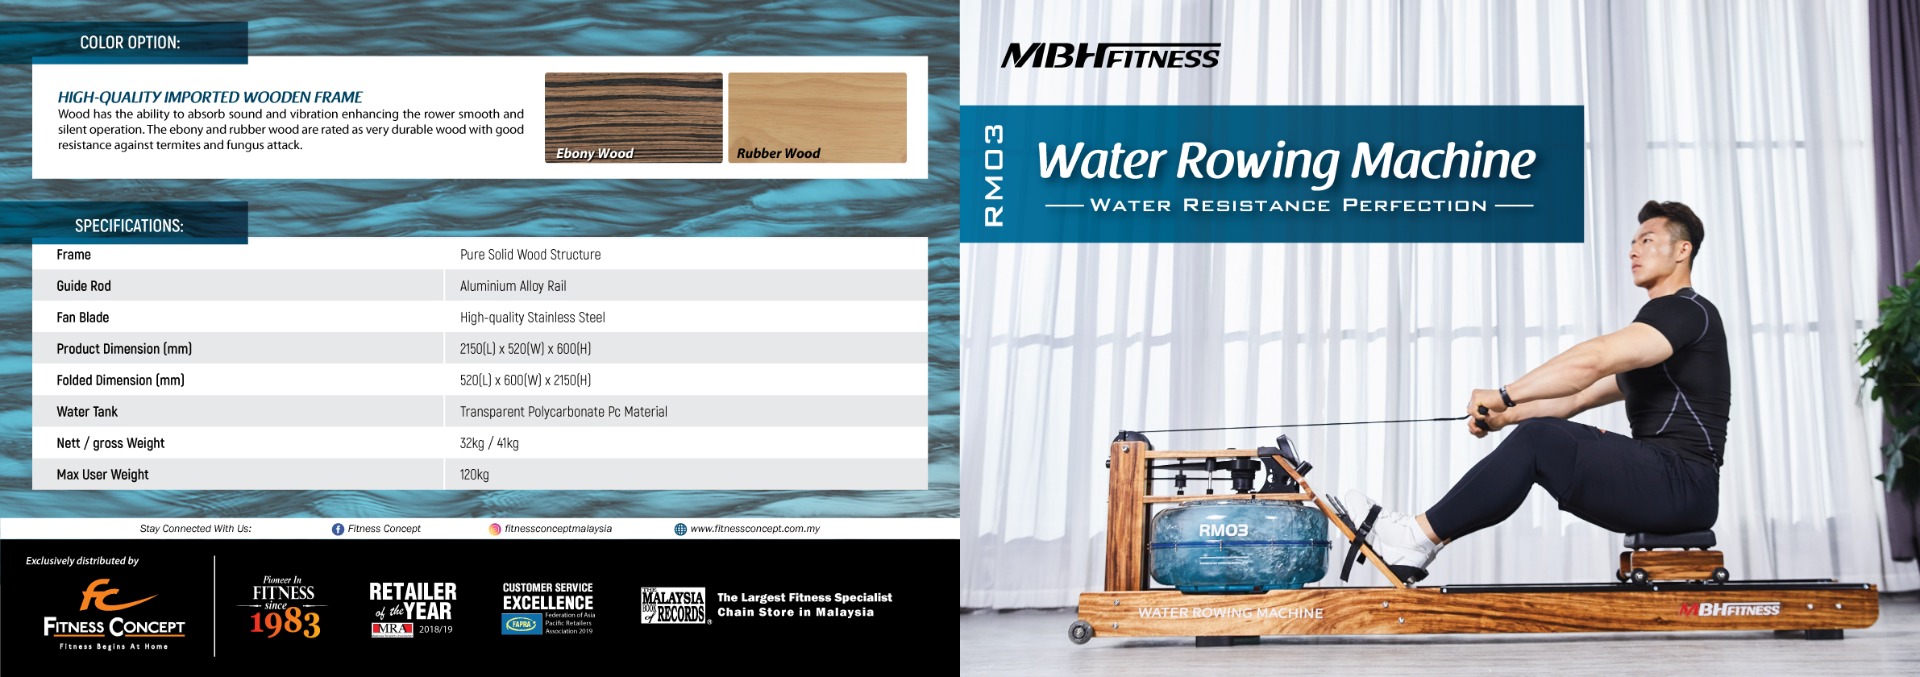 MBH Fitness RM03 Water Rower: Achieve Total Body Fitness with Fluid Motion and Dynamic Resistance!